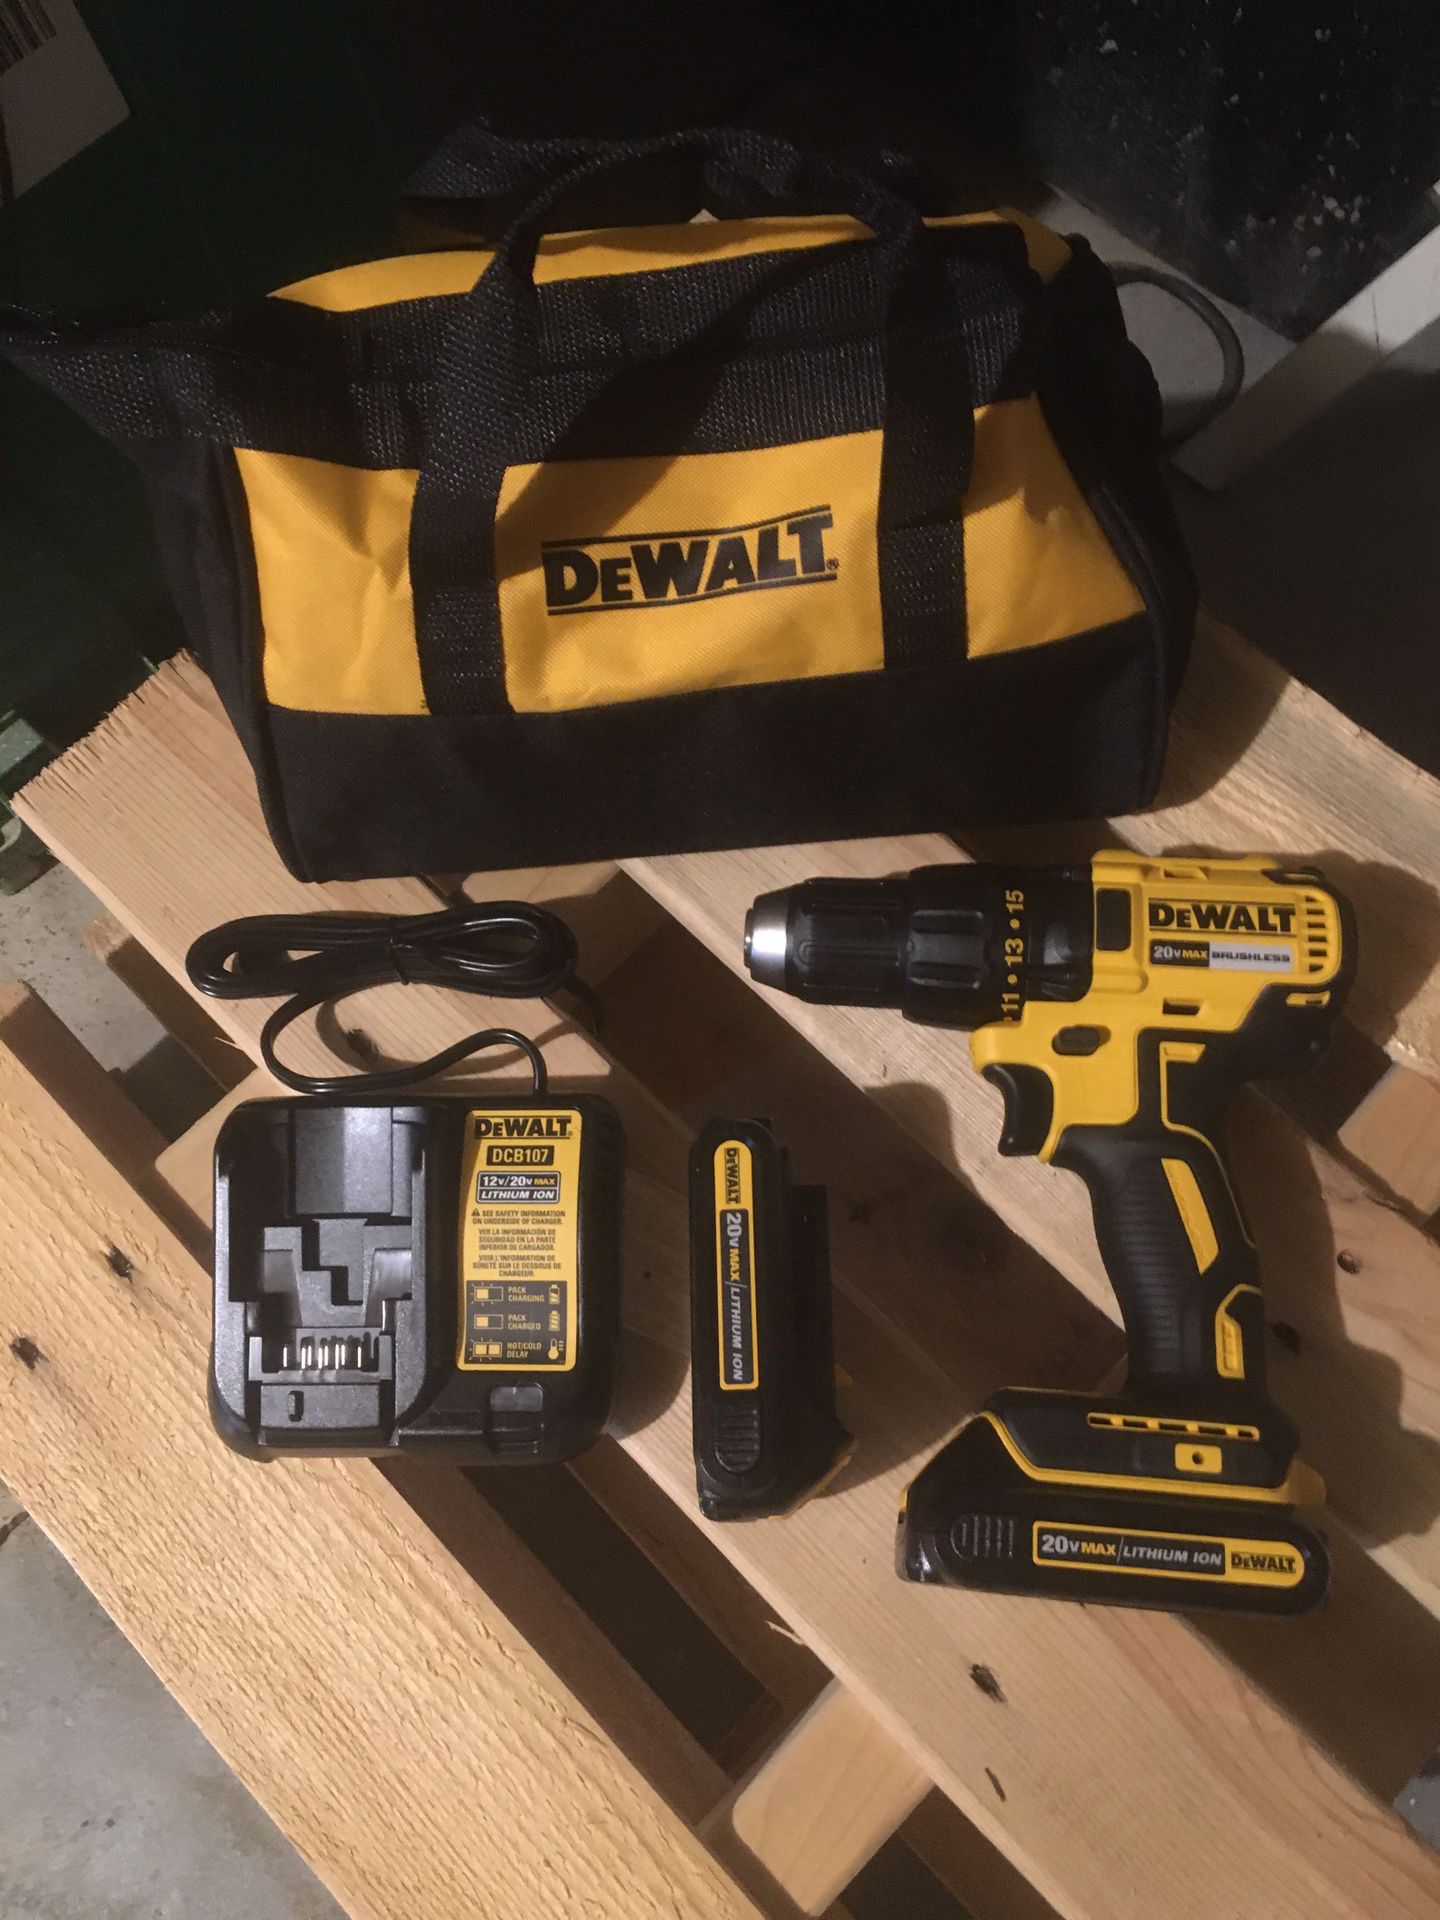 Dewalt 20-Volt Max Lithium Ion (Li-Ion) 1/2-In Cordless Brushless Drill Battery Included Soft case brand new